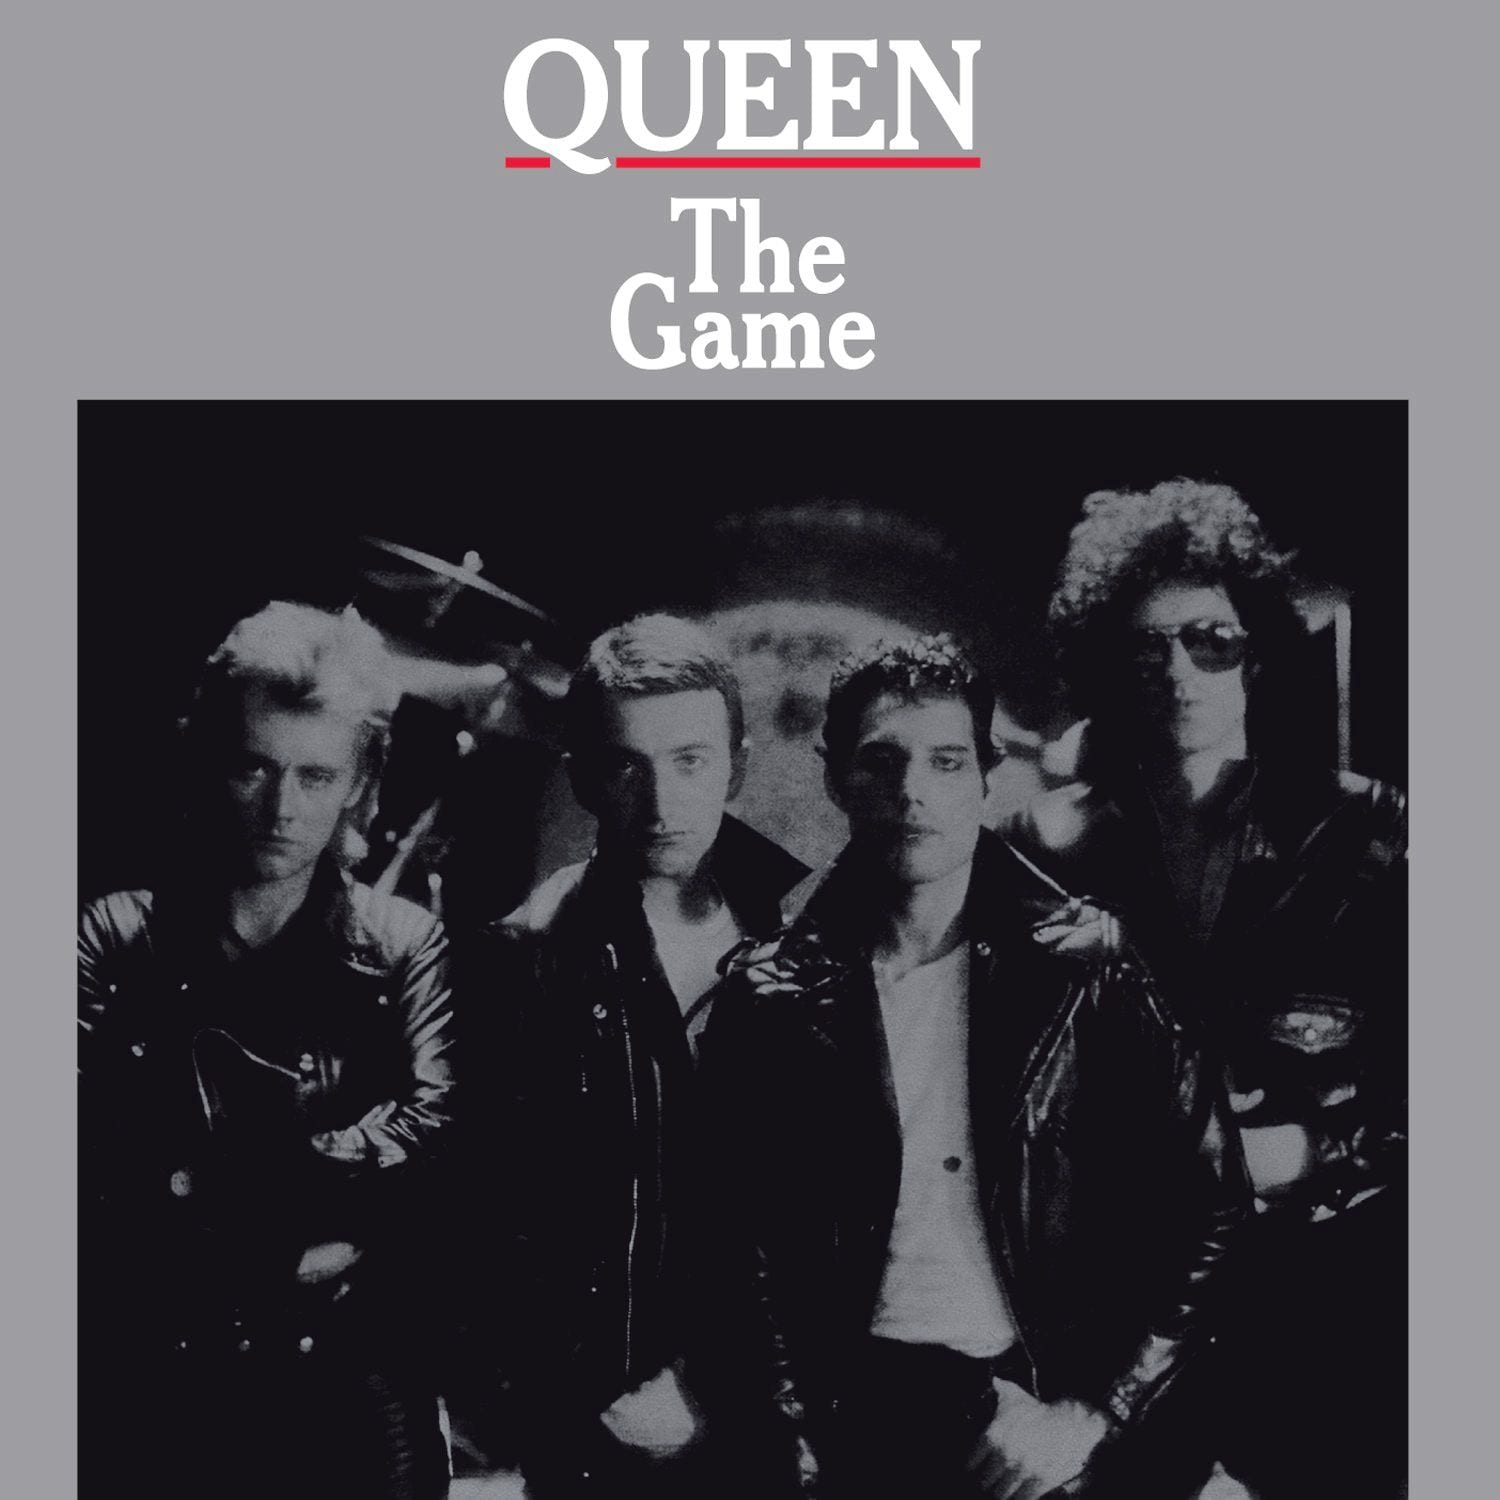 Funk Rock and Synthesizers in Munich: Queen’s ‘The Game’ at 40